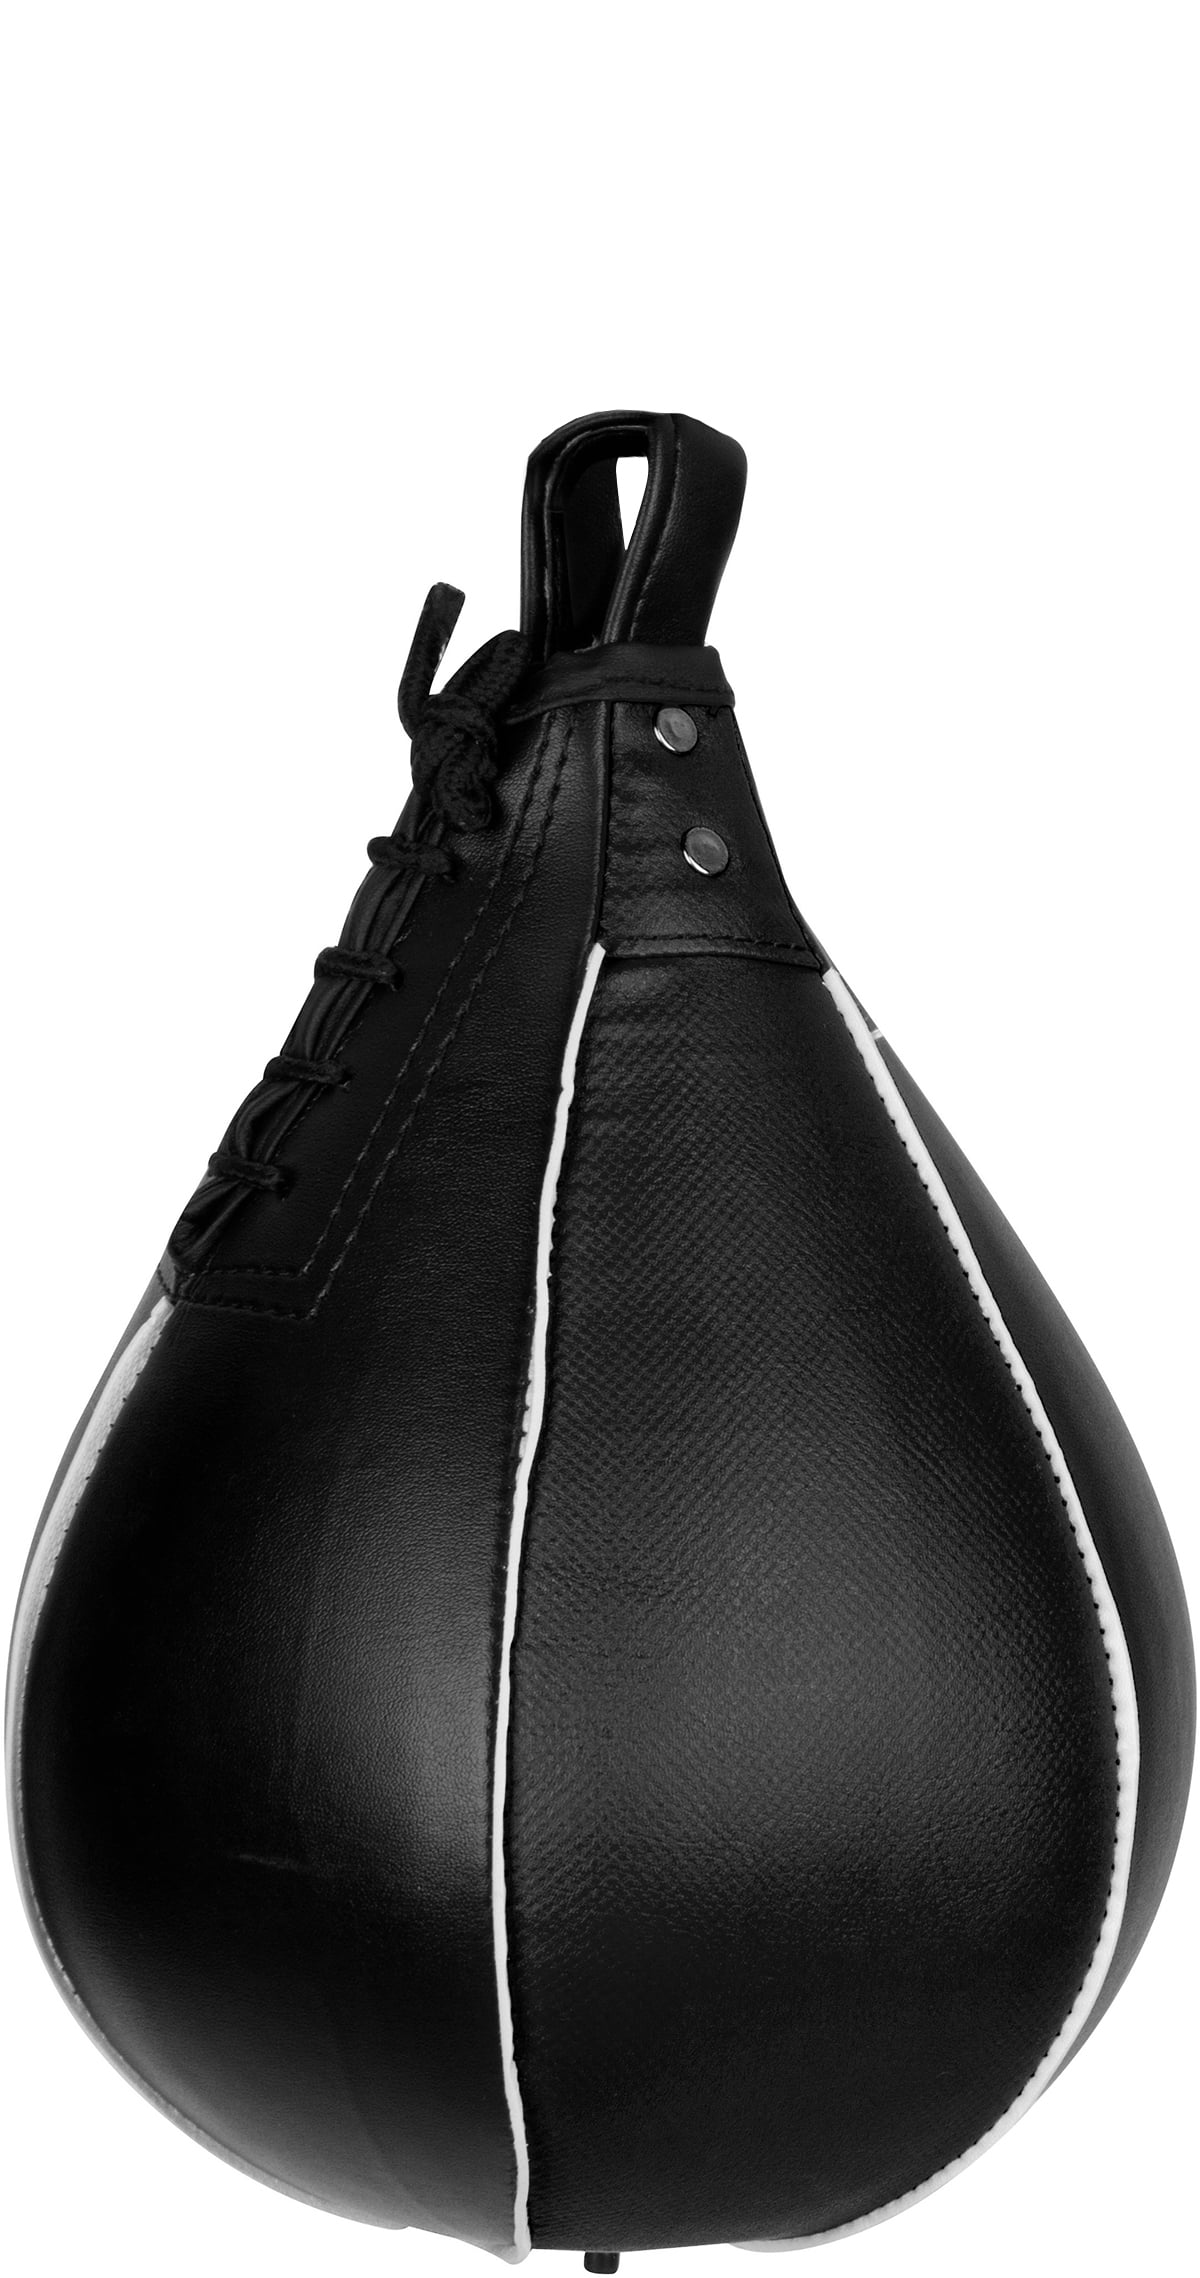 Boxing Speed Bag For Workout Training by Trademark Innovations - www.bagssaleusa.com/product-category/classic-bags/